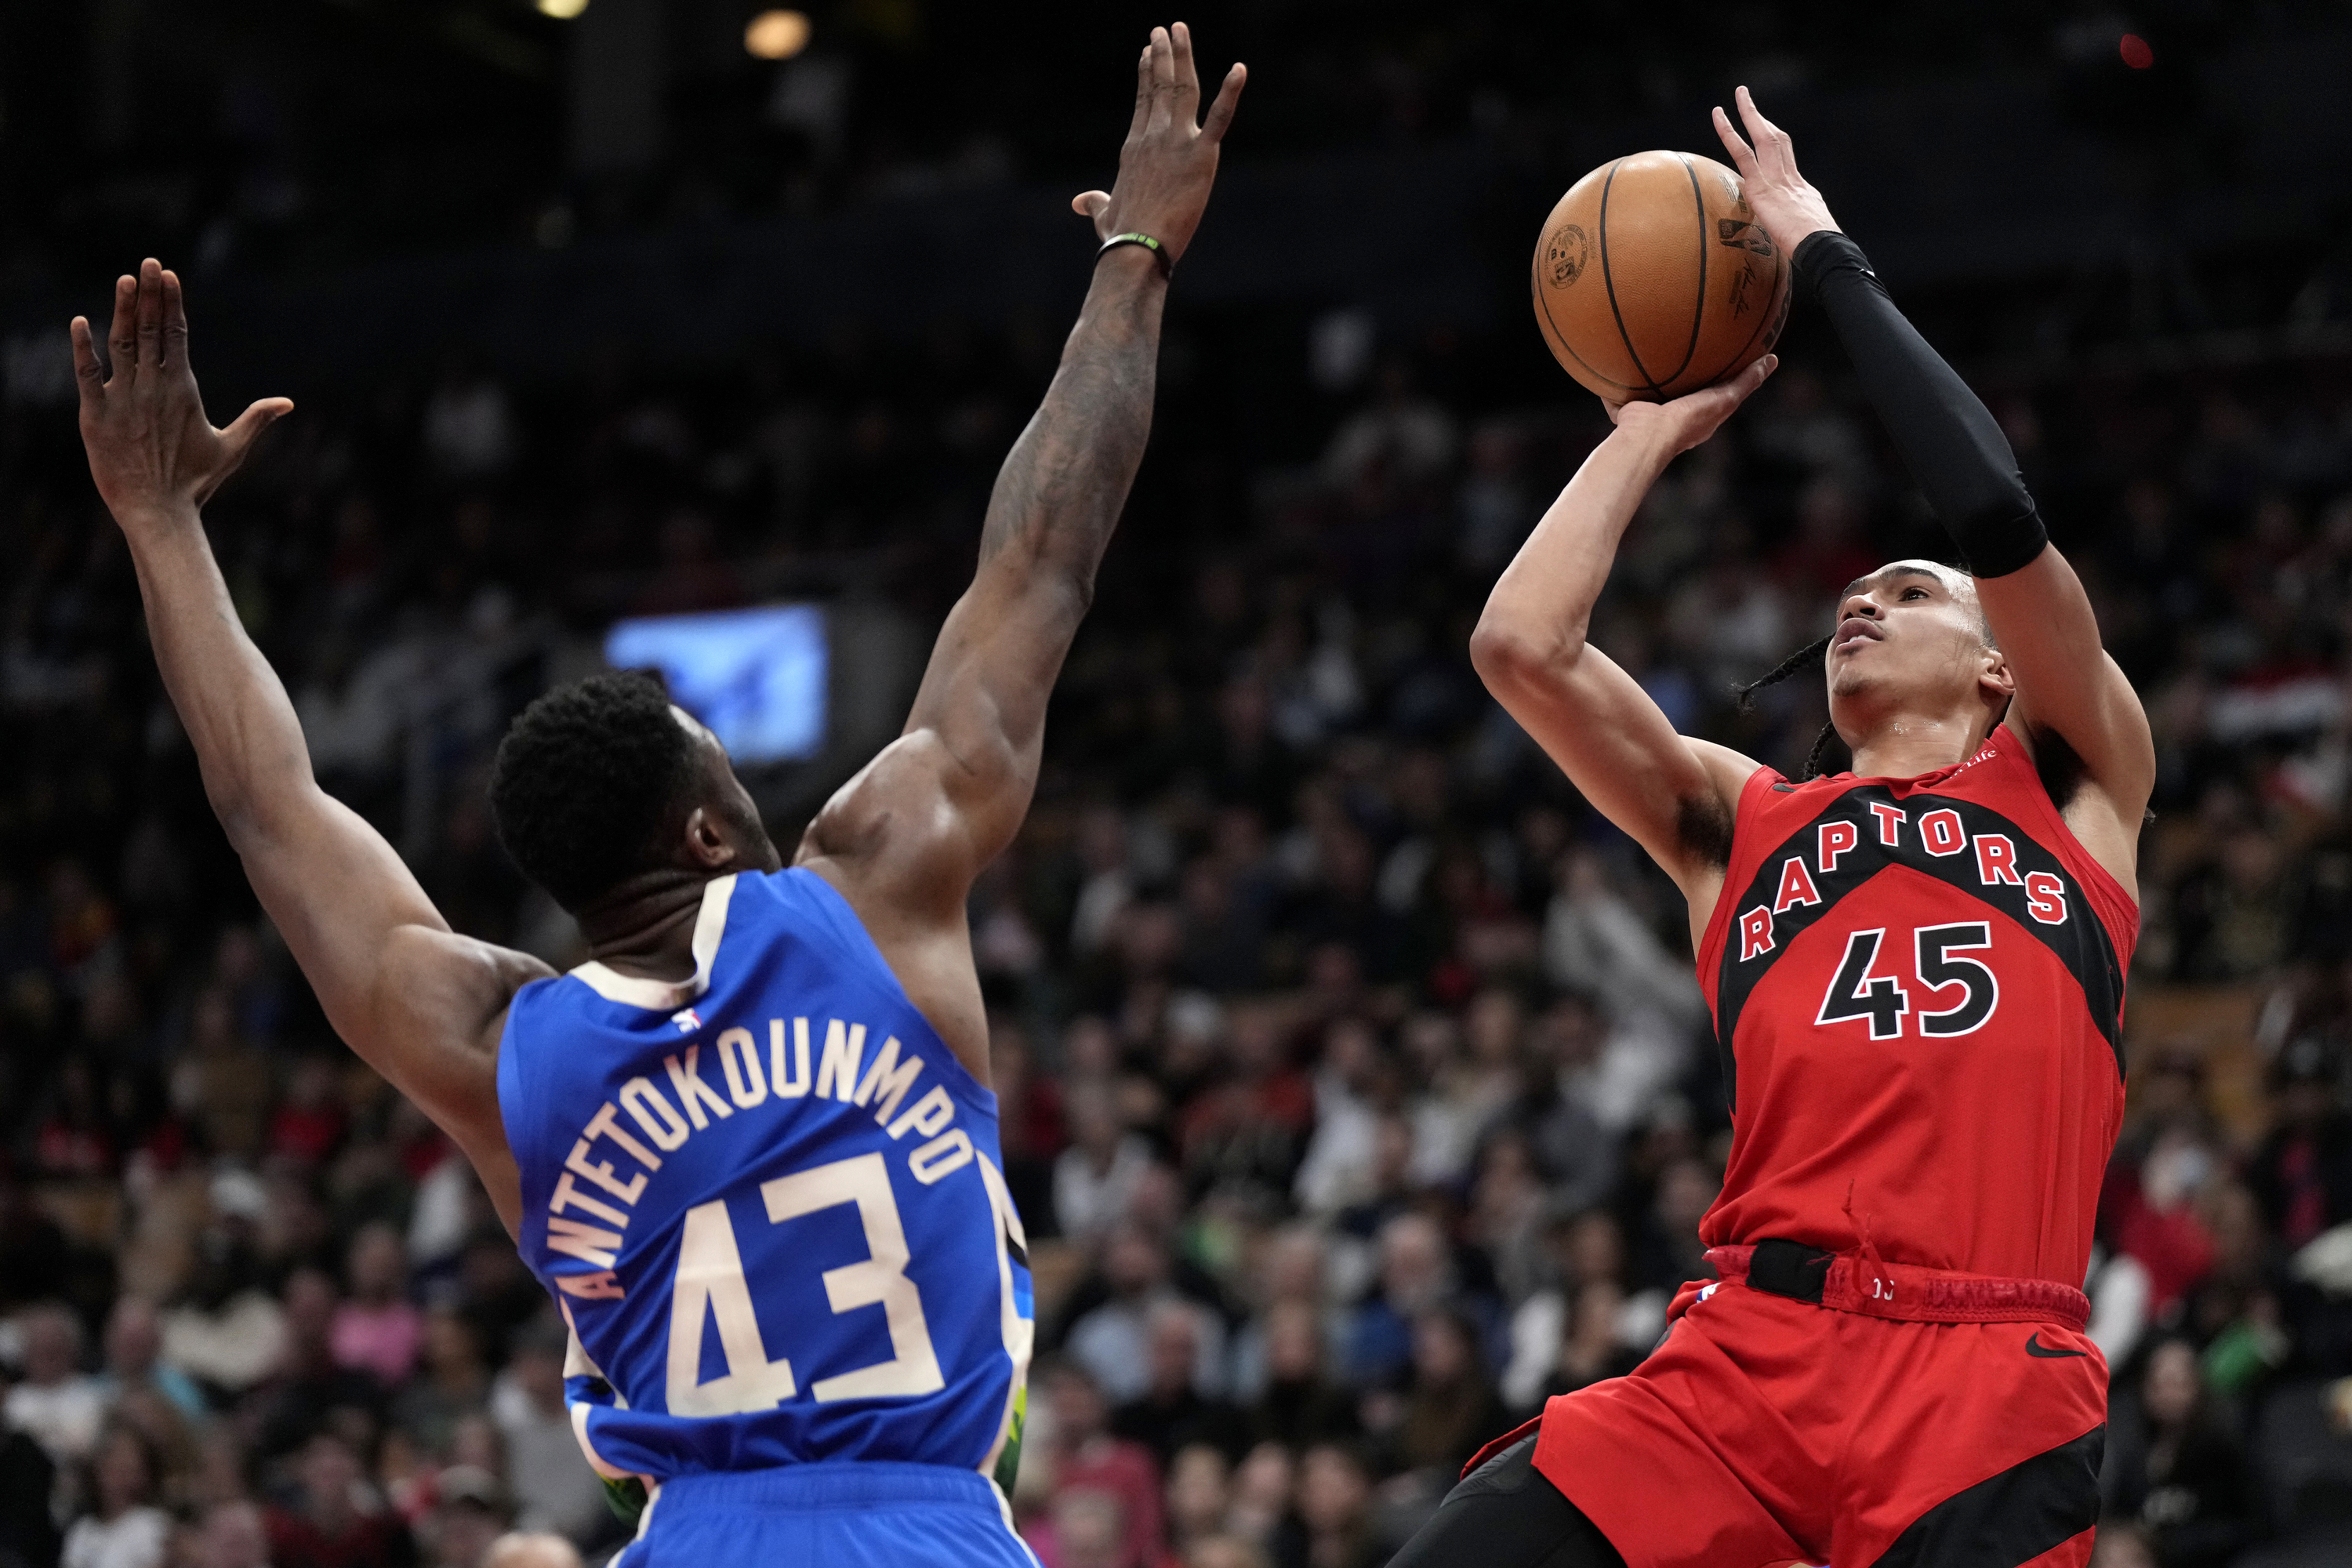 Who are the Toronto Raptors biggest competitors for seeding this season?